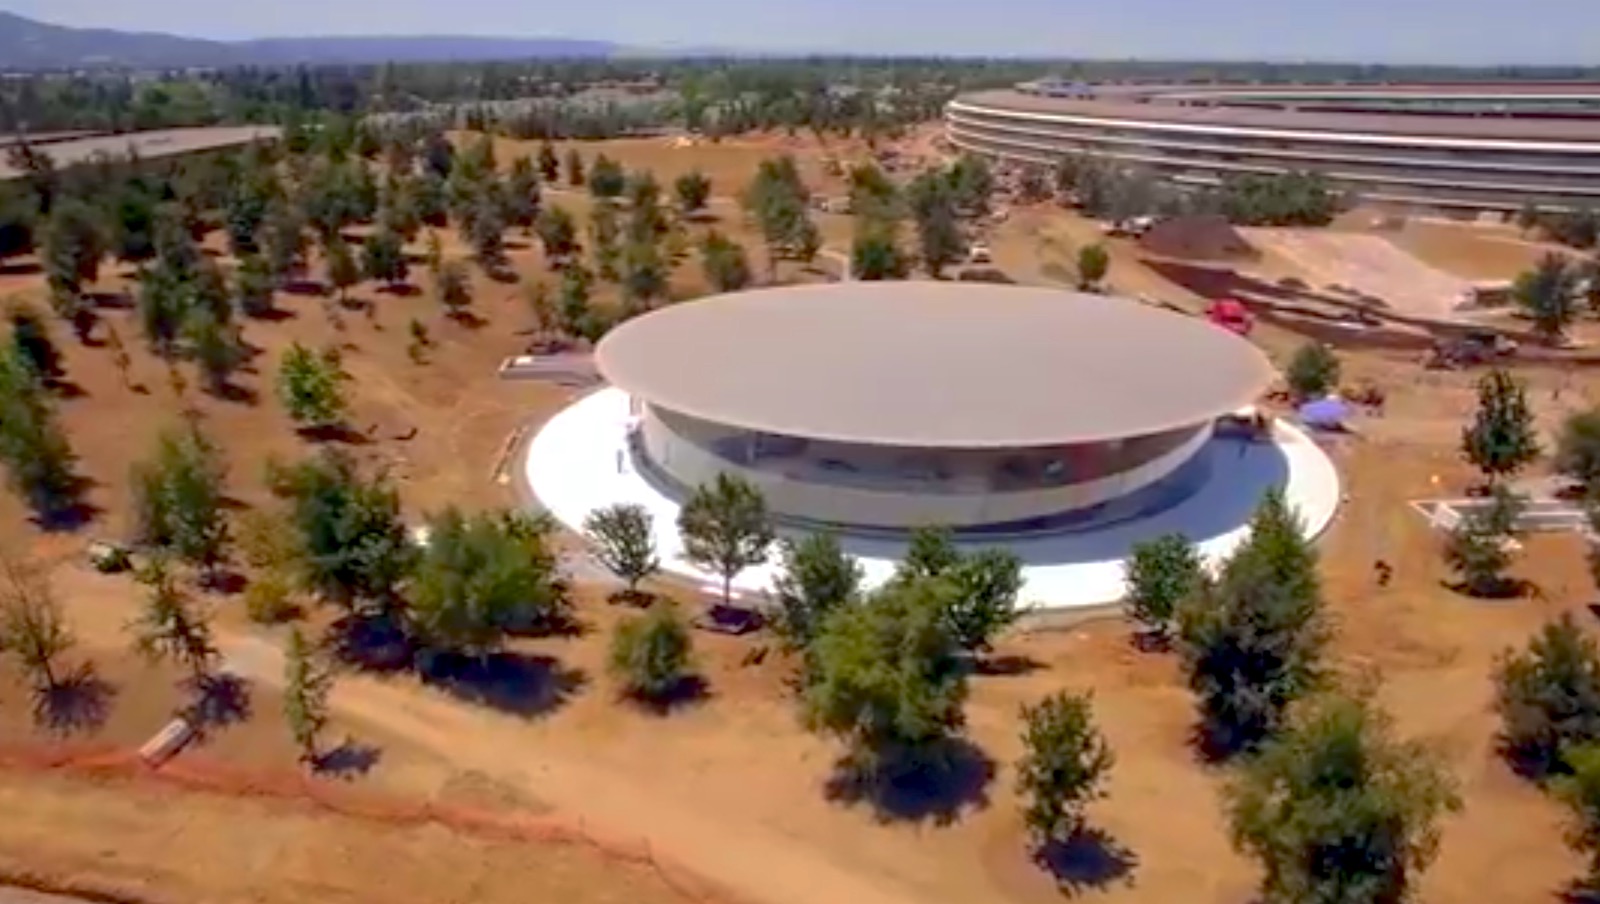 Droning on about Apple's new campus